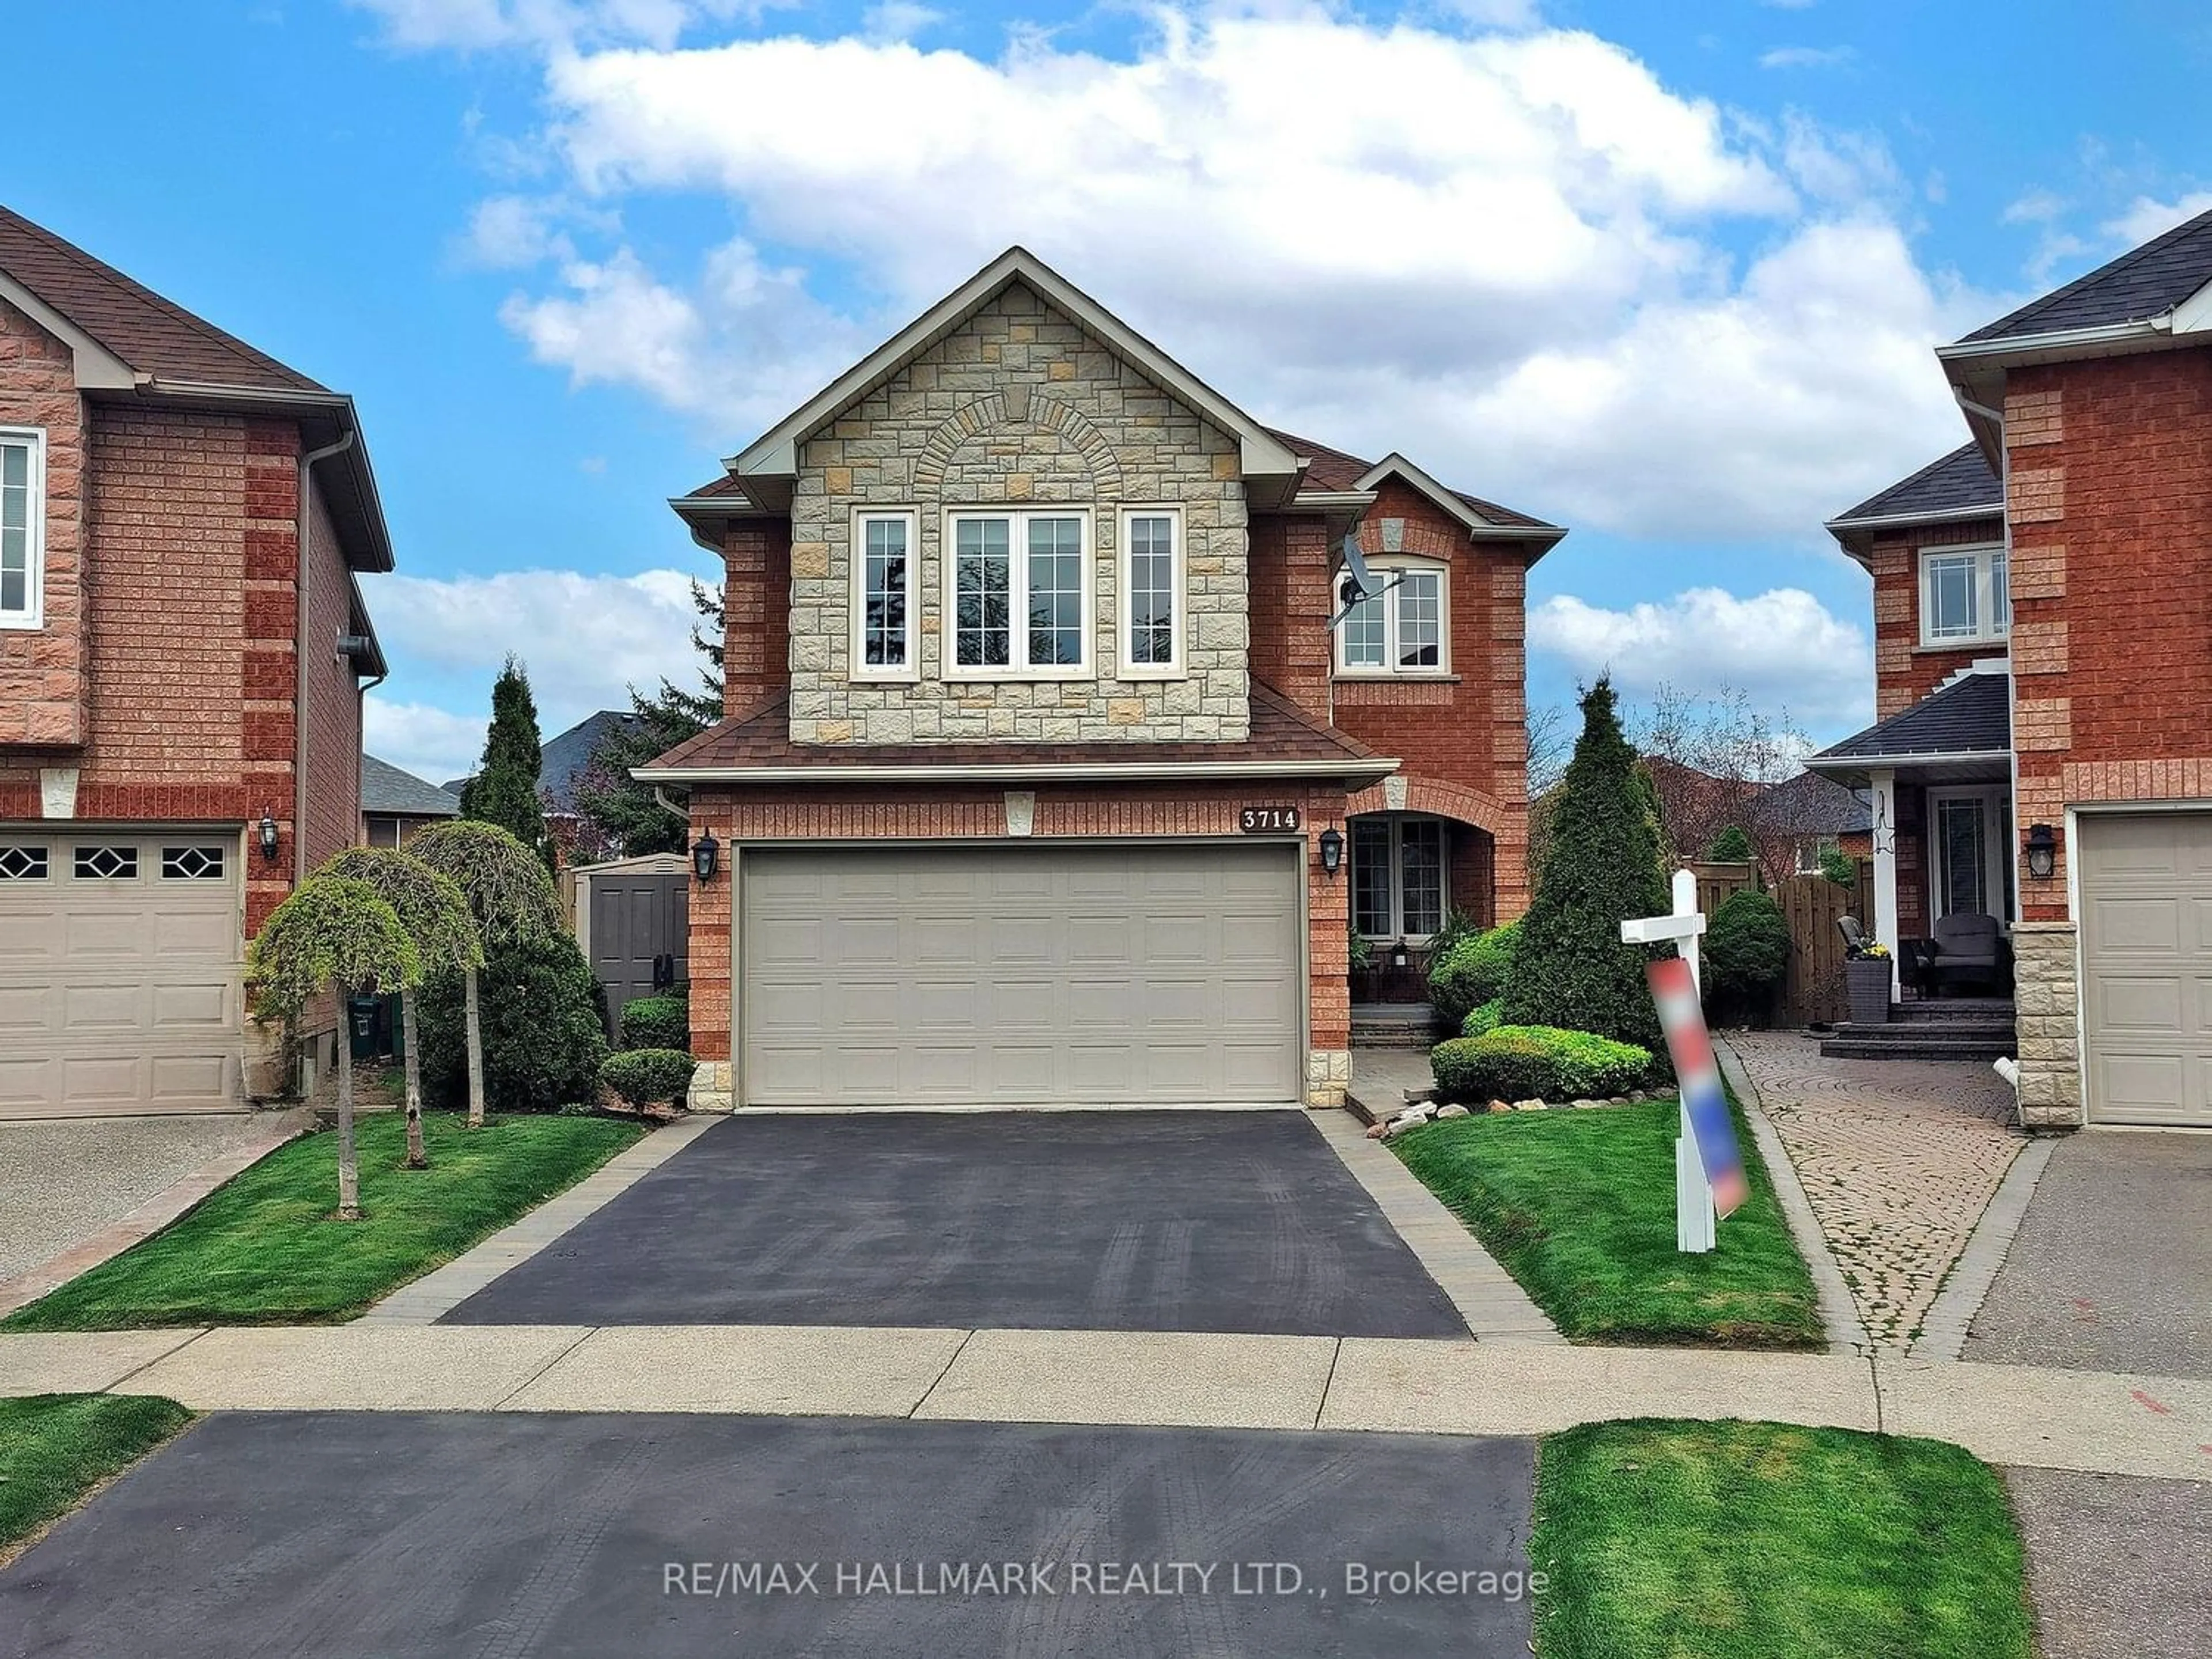 Home with brick exterior material for 3714 Althorpe Circ, Mississauga Ontario L5N 7G5